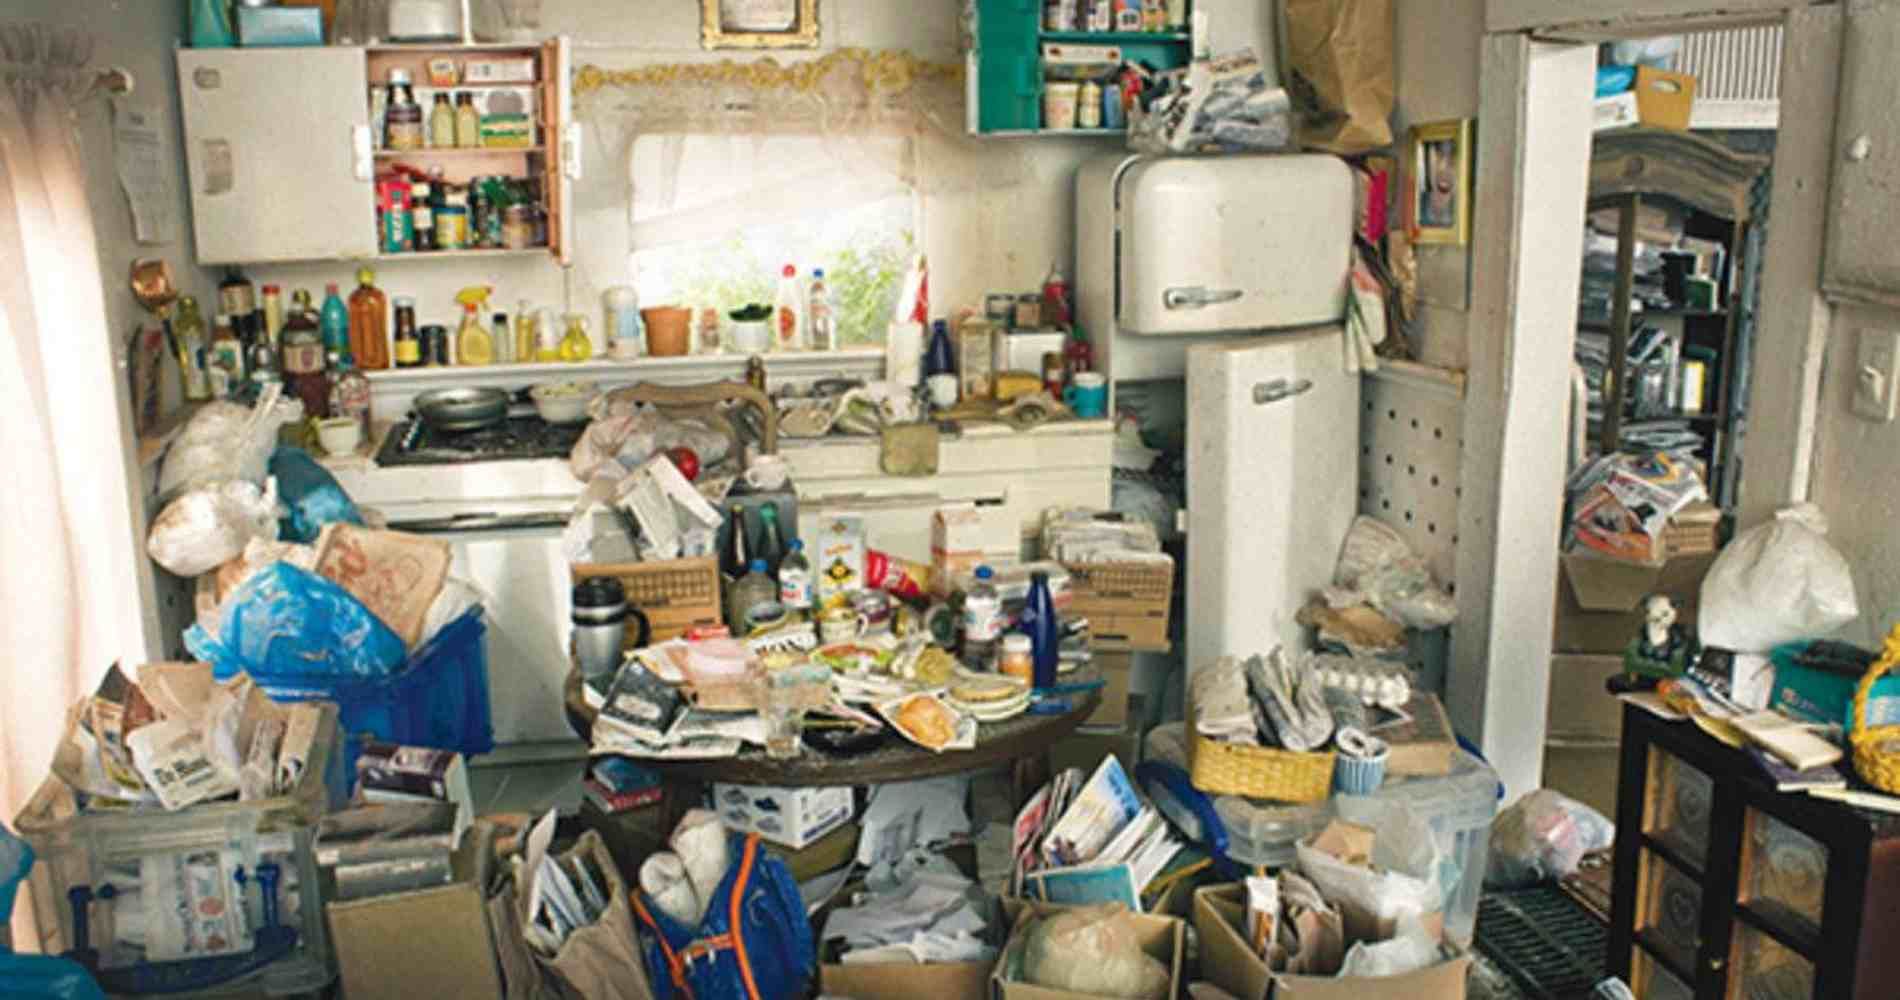 #1 for Hoarding Cleanup in San Tan Valley, AZ with Over 1200 5-Star Reviews!